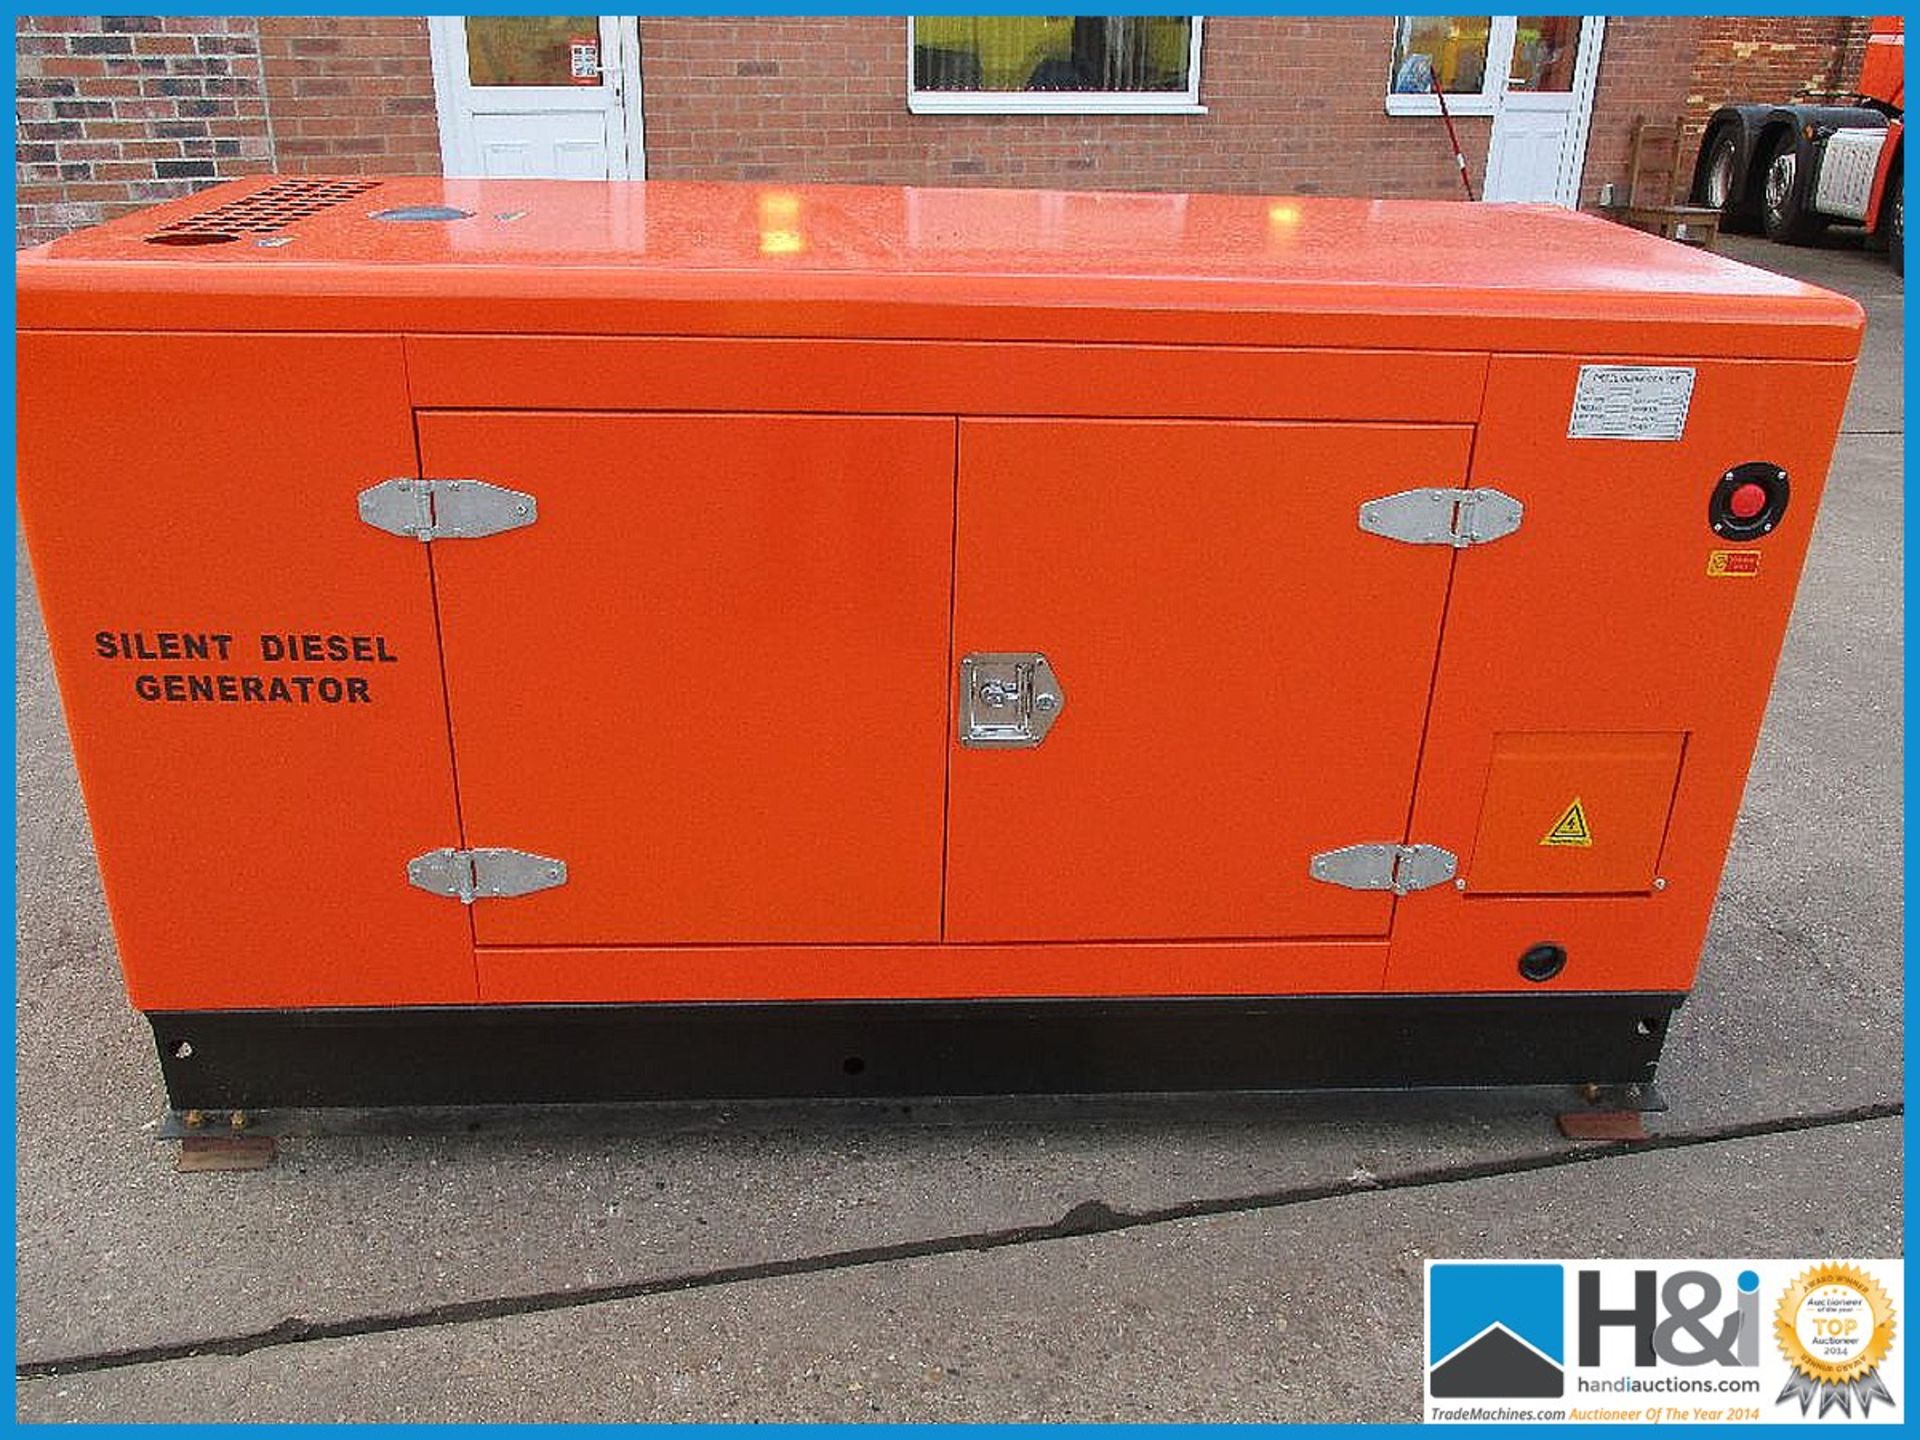 Brand new, unused GF3-40K 40KvA skid mounted generator. No oil or water and ready for